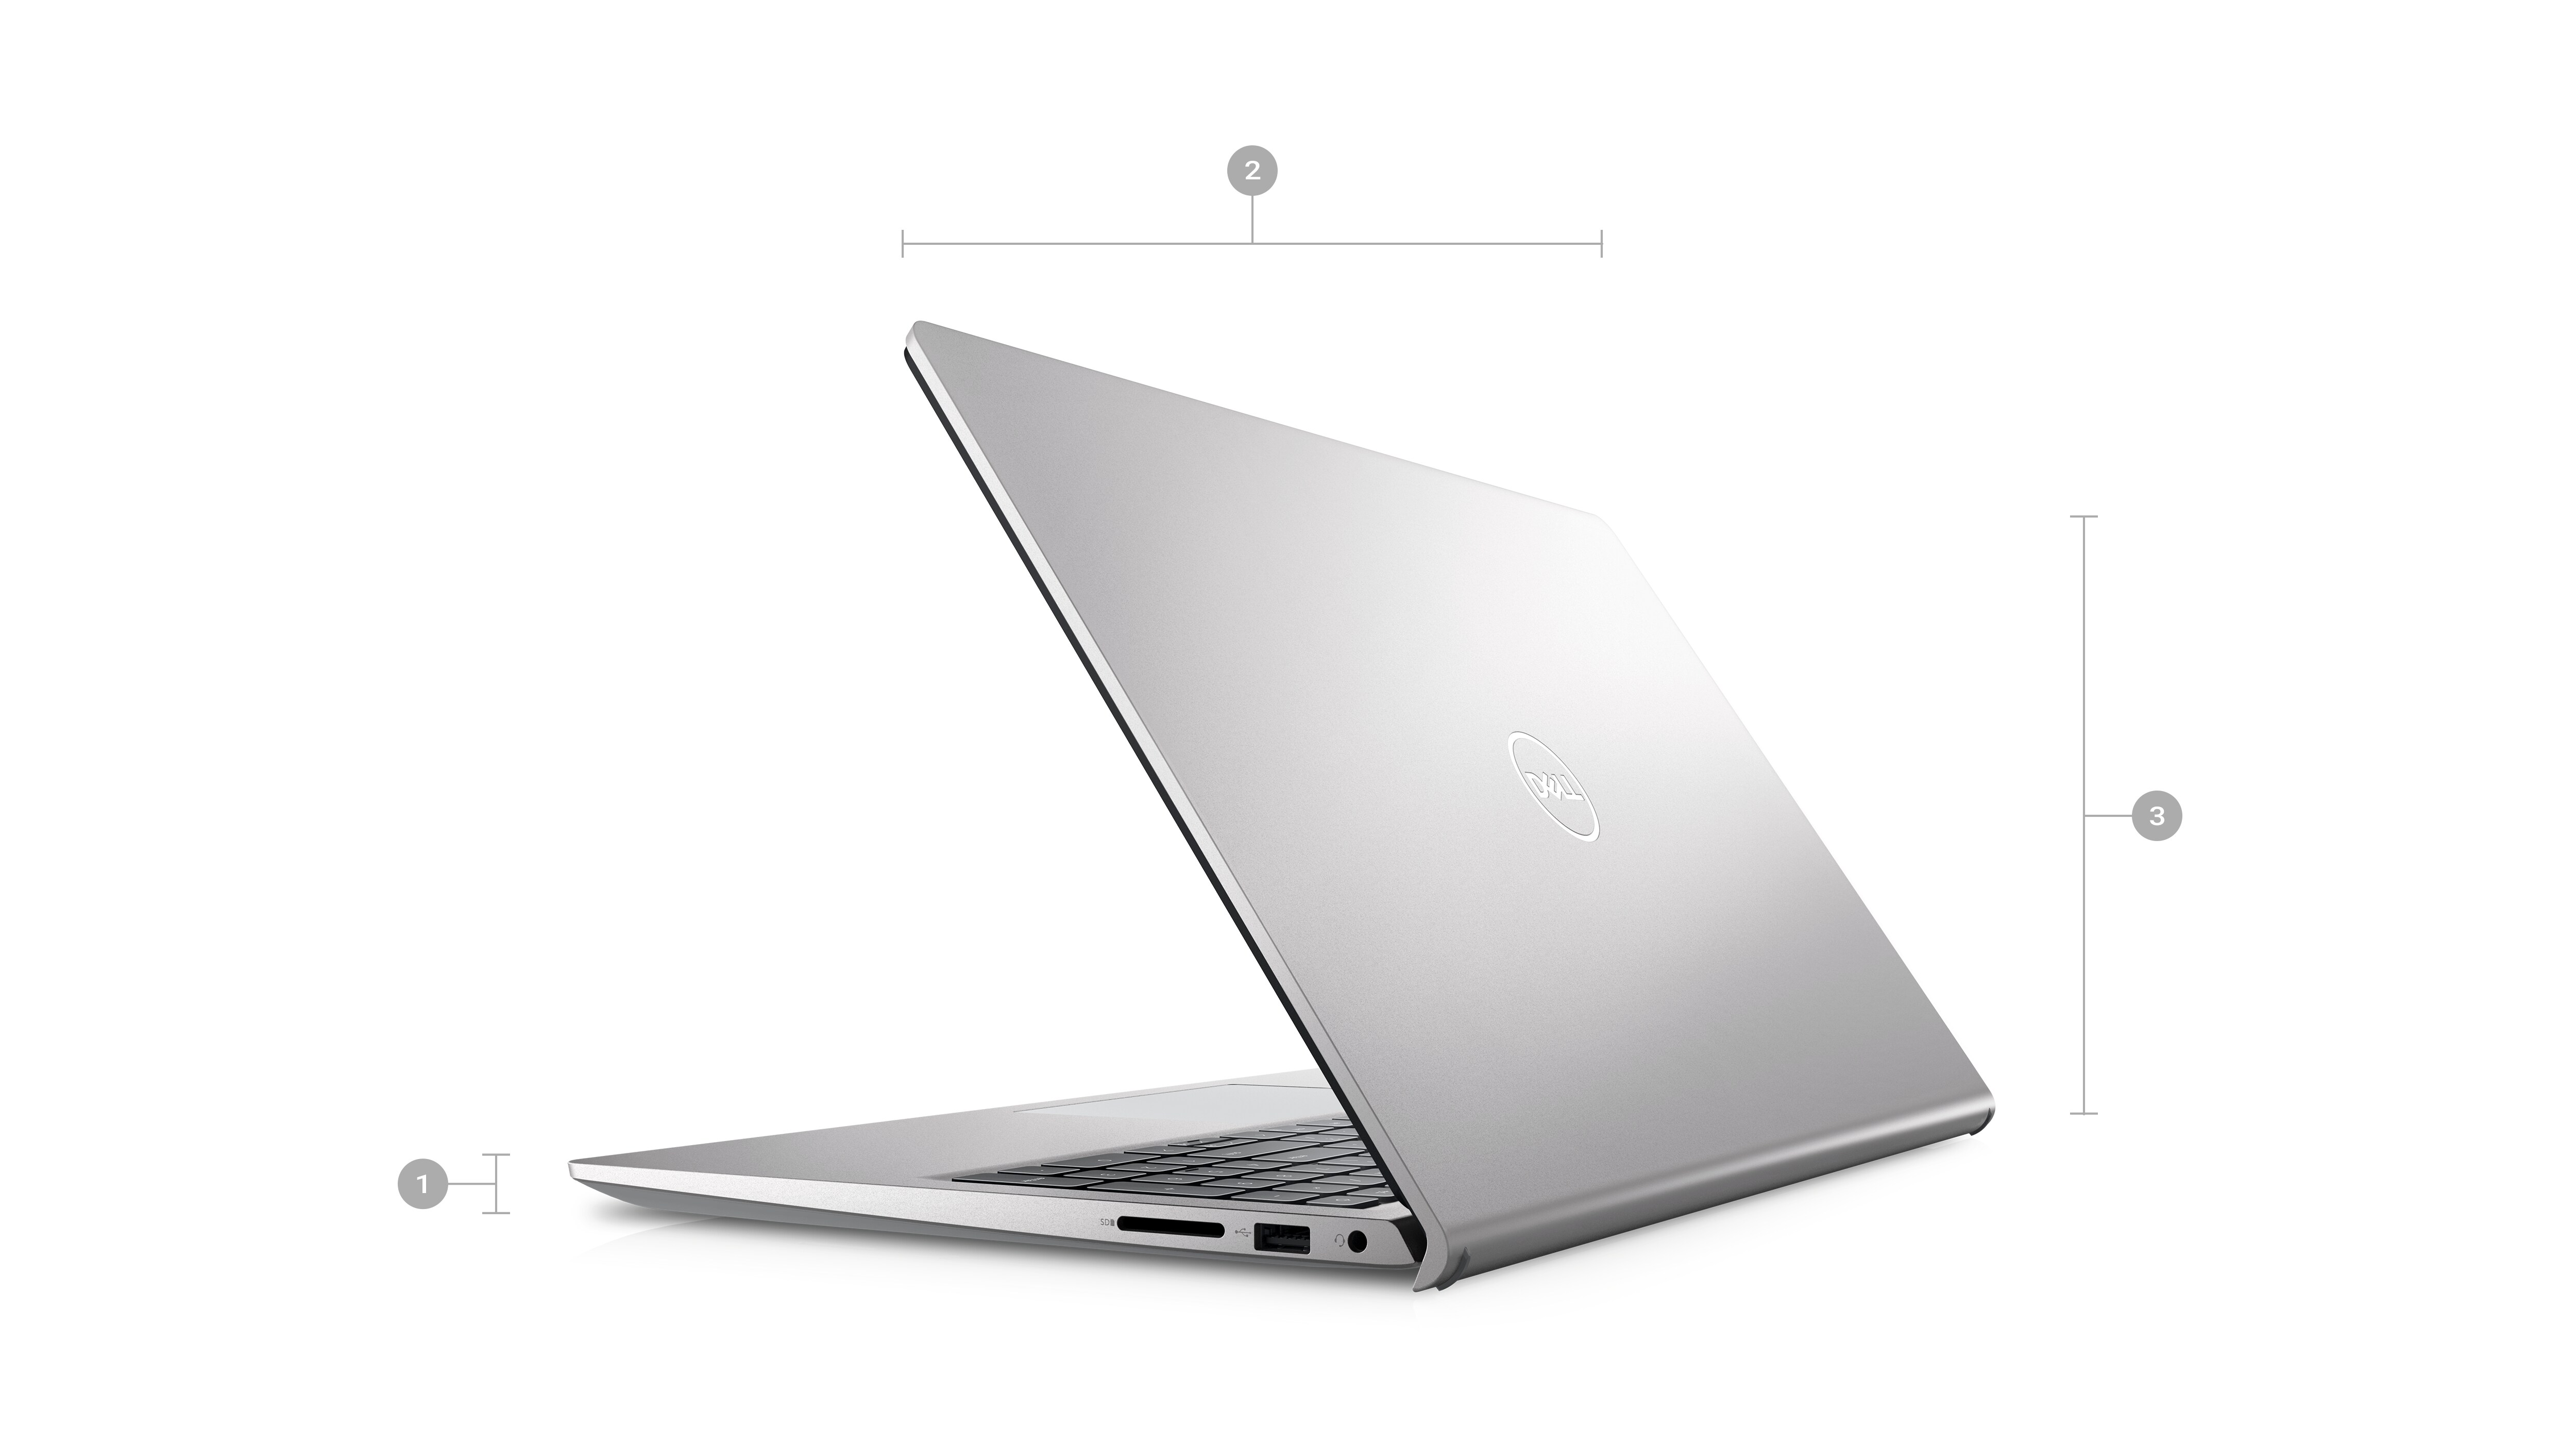 Picture of a Dell Inspiron 15 3525 laptop with its back visible and numbers from 1 to 3 signaling product dimensions & weight.